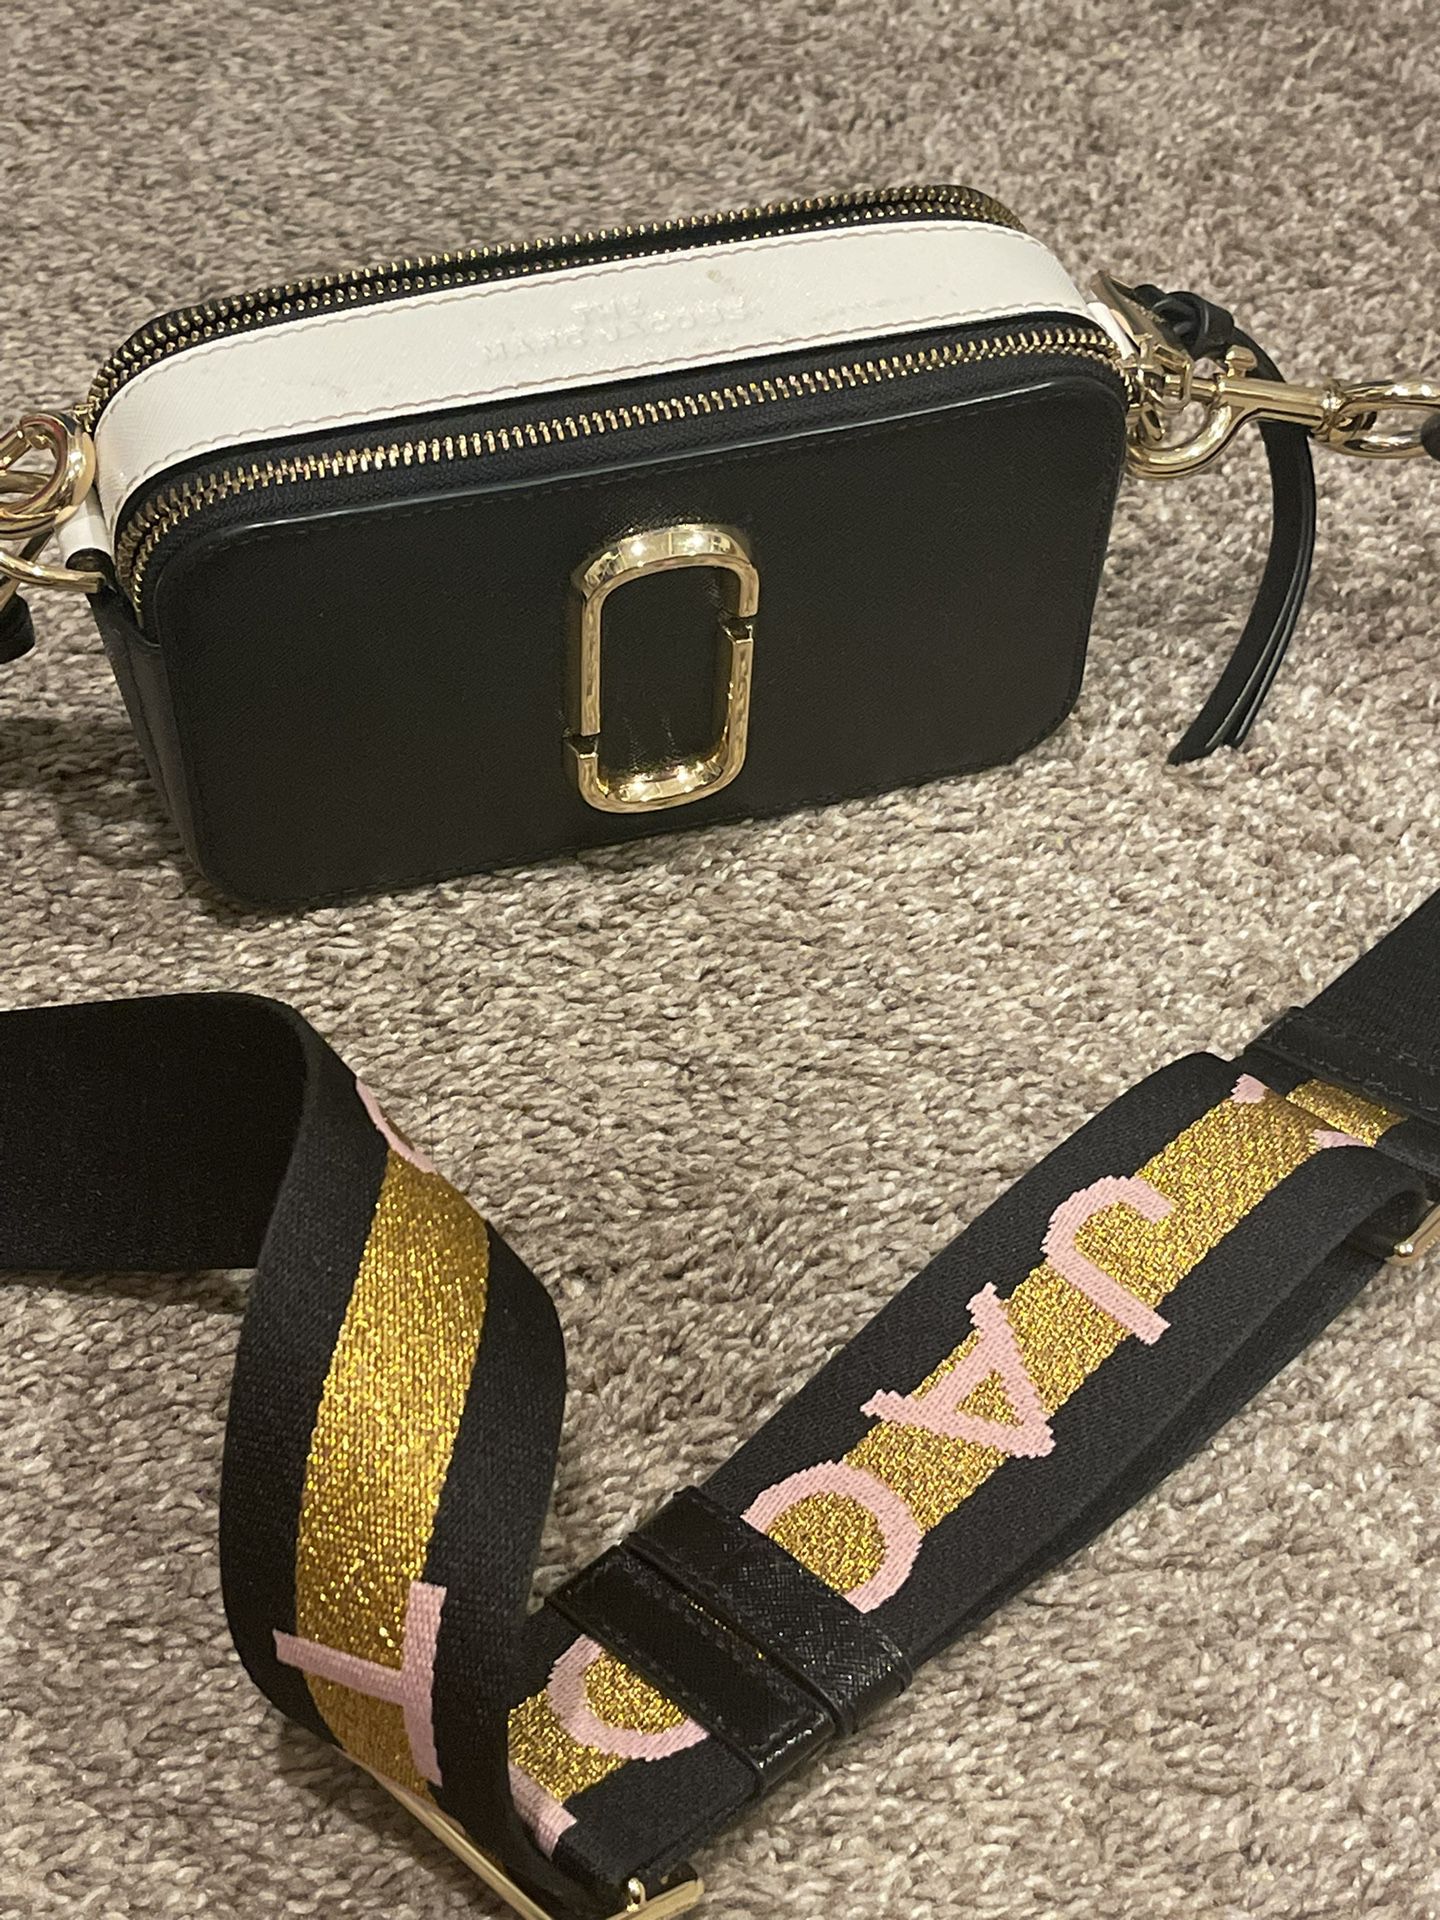 Authentic Marc Jacobs Snapshot Crossbody for Sale in Gresham, OR - OfferUp